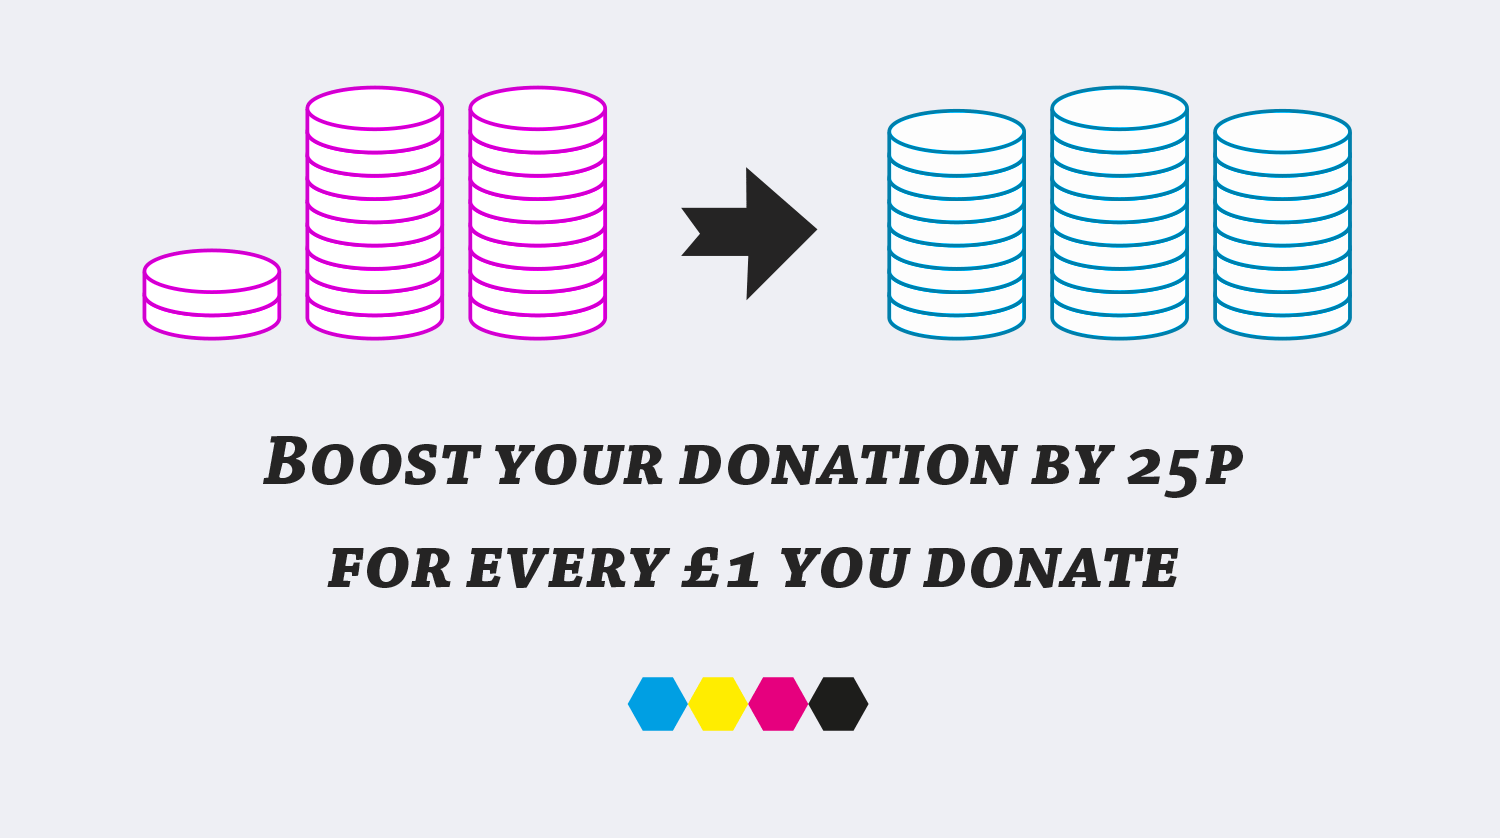 Boost your donation by 25p for every £1 you donate